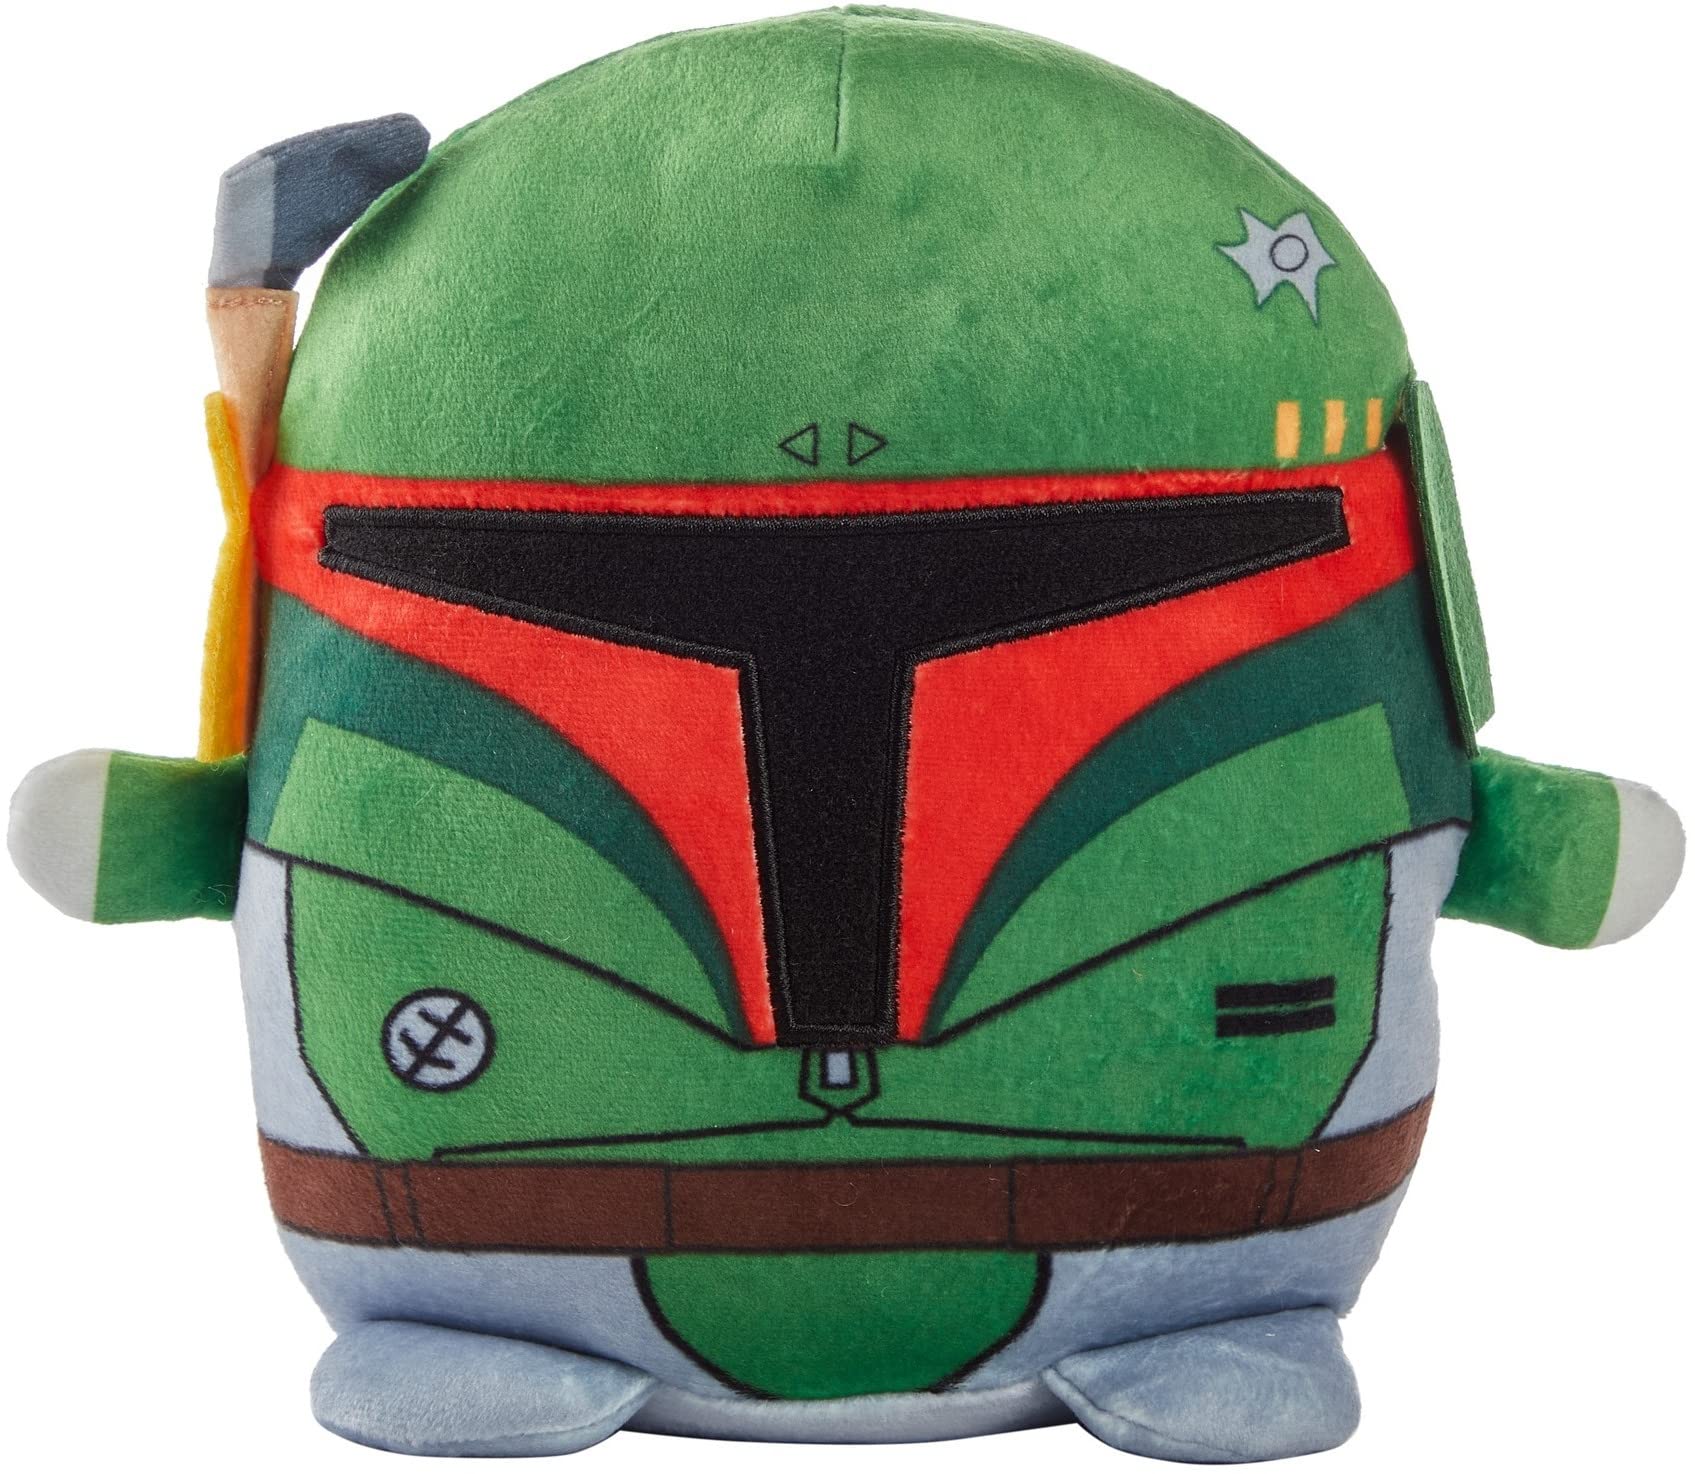 Mattel-Star Wars Cuutopia Plush Boba Fett, 10-In Soft Rounded Pillow Doll-HBW84-Legacy Toys